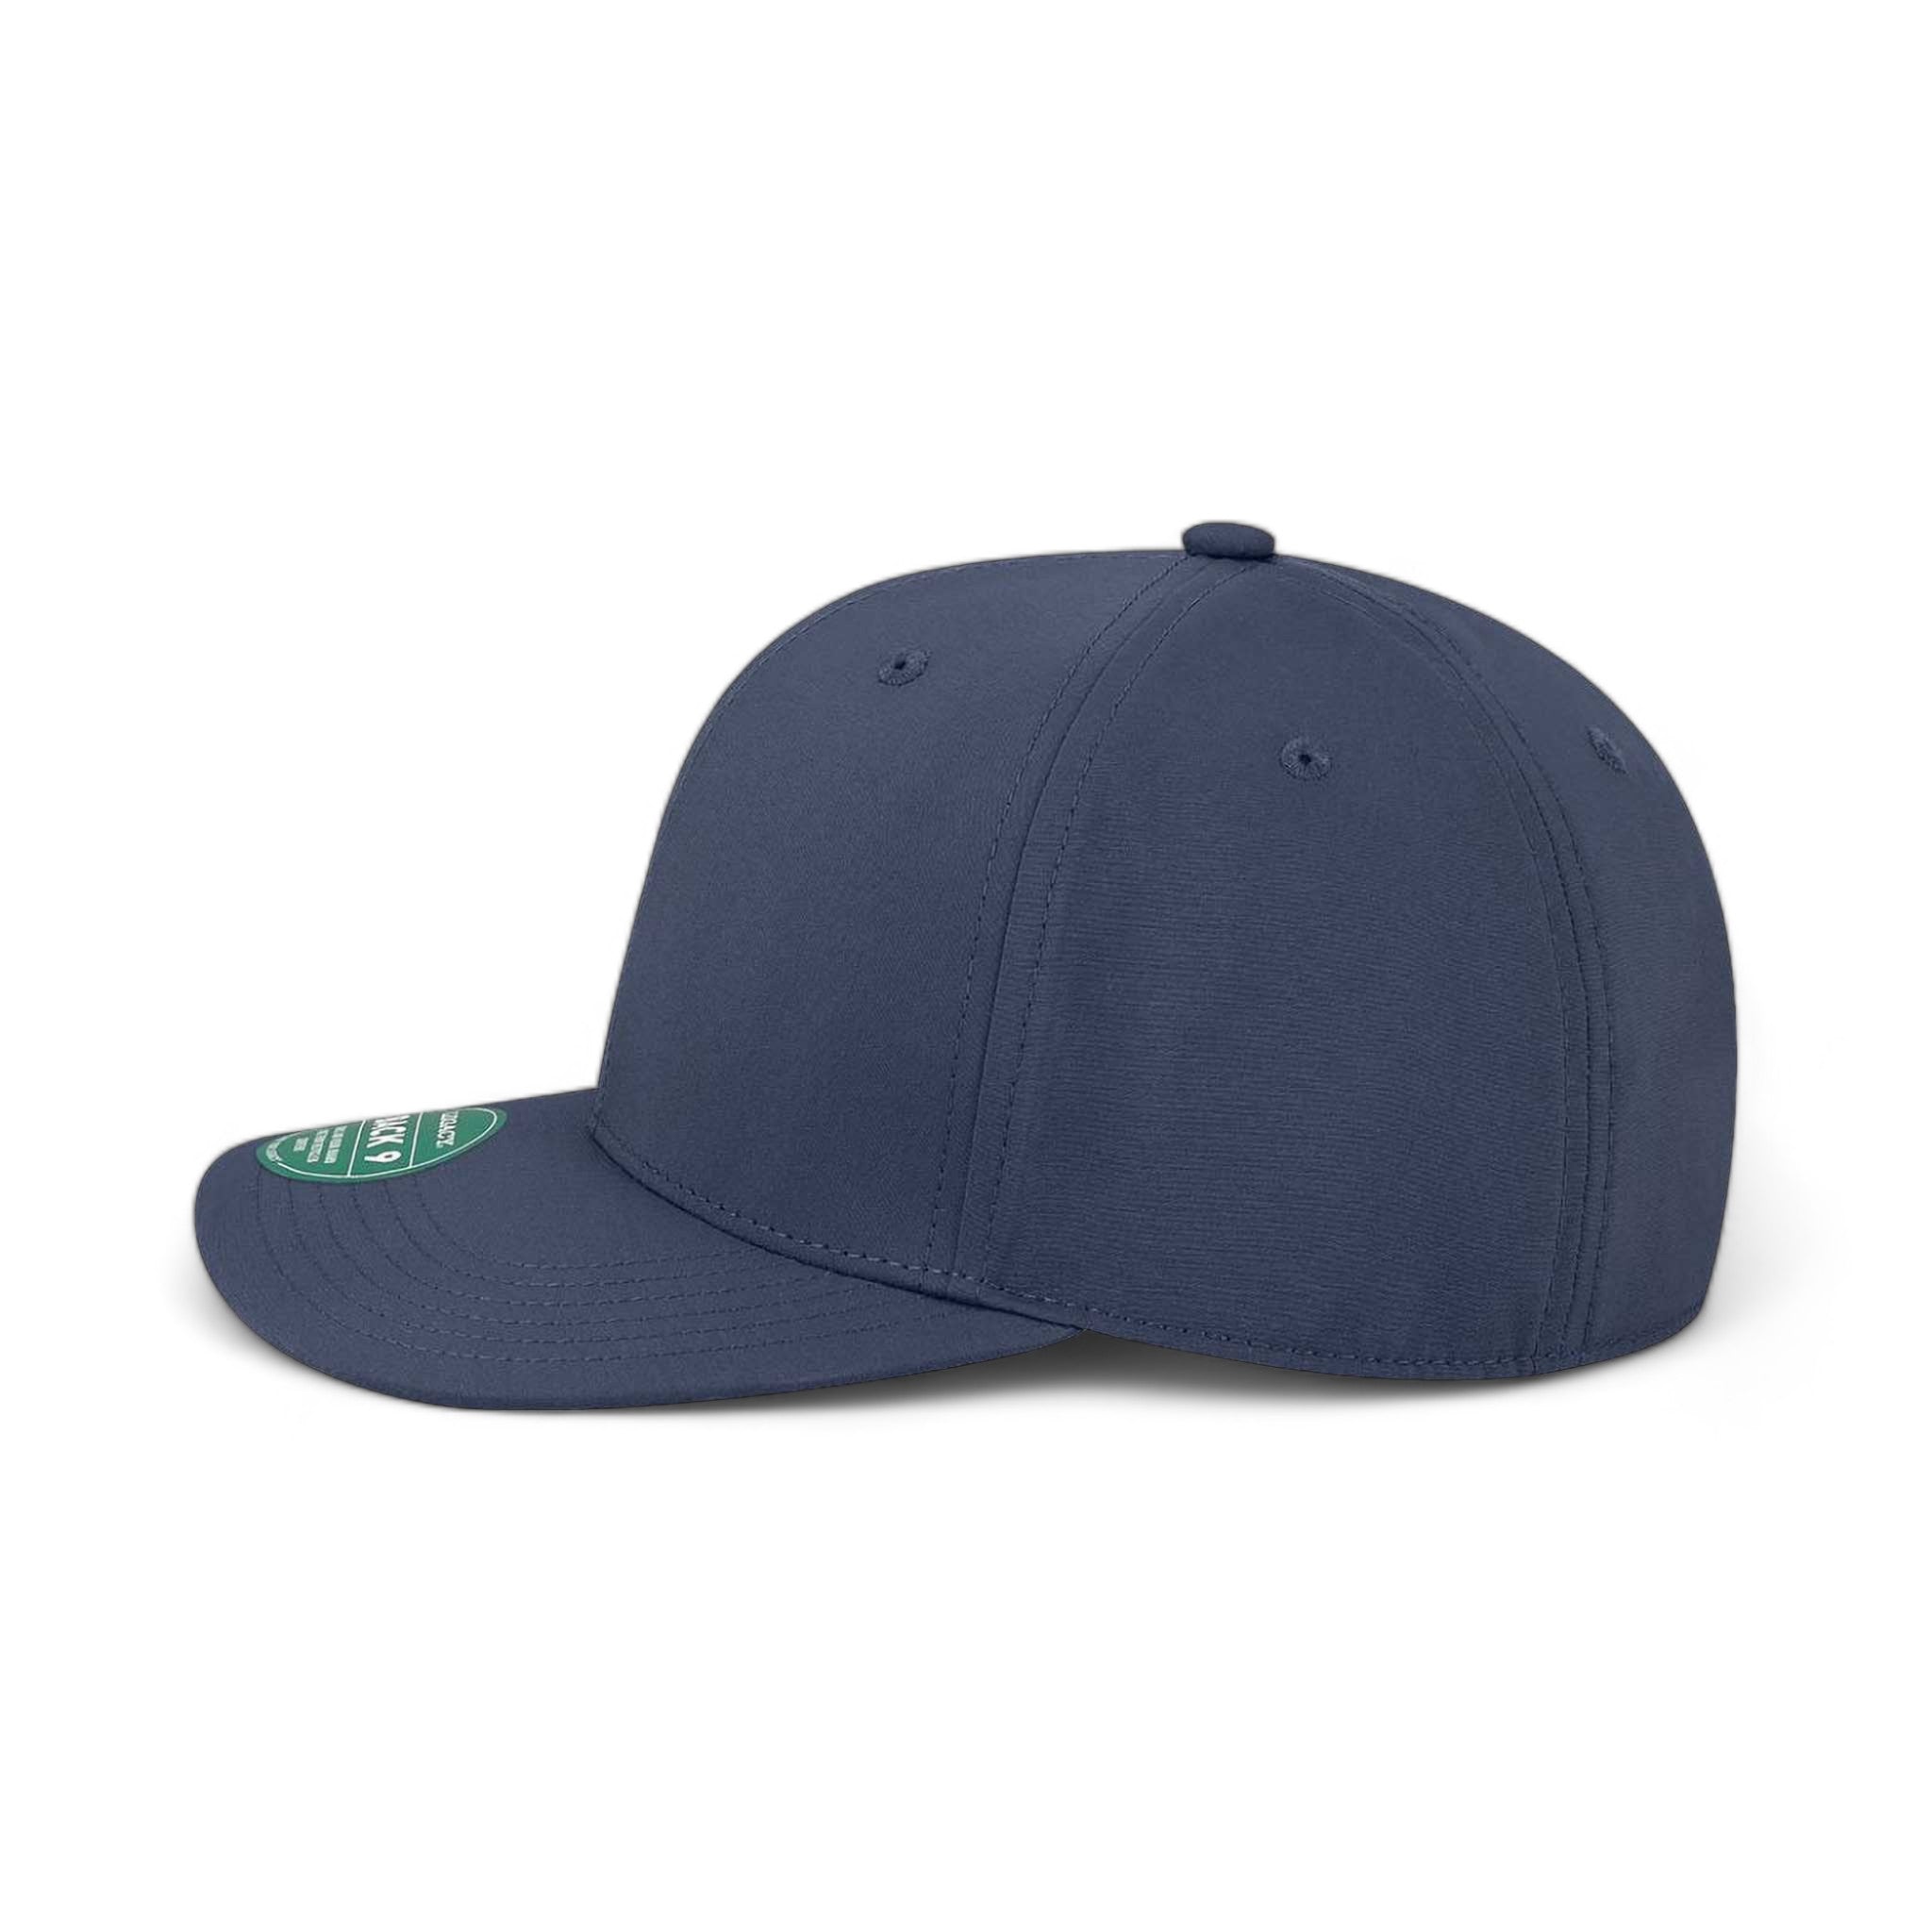 Side view of LEGACY B9A custom hat in navy